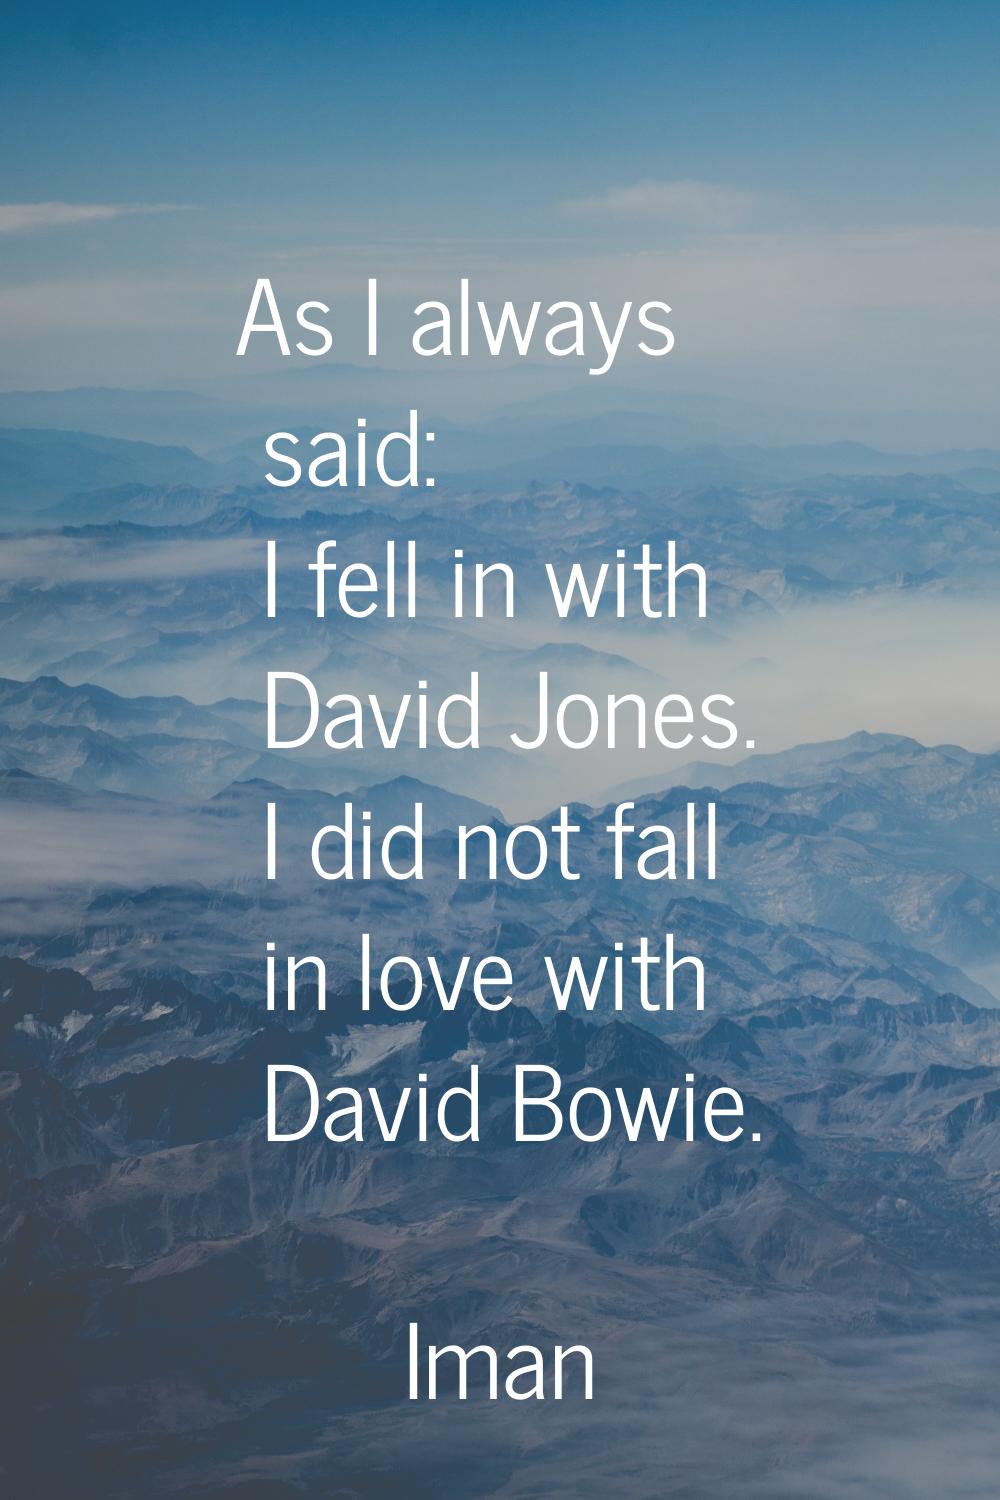 As I always said: I fell in with David Jones. I did not fall in love with David Bowie.